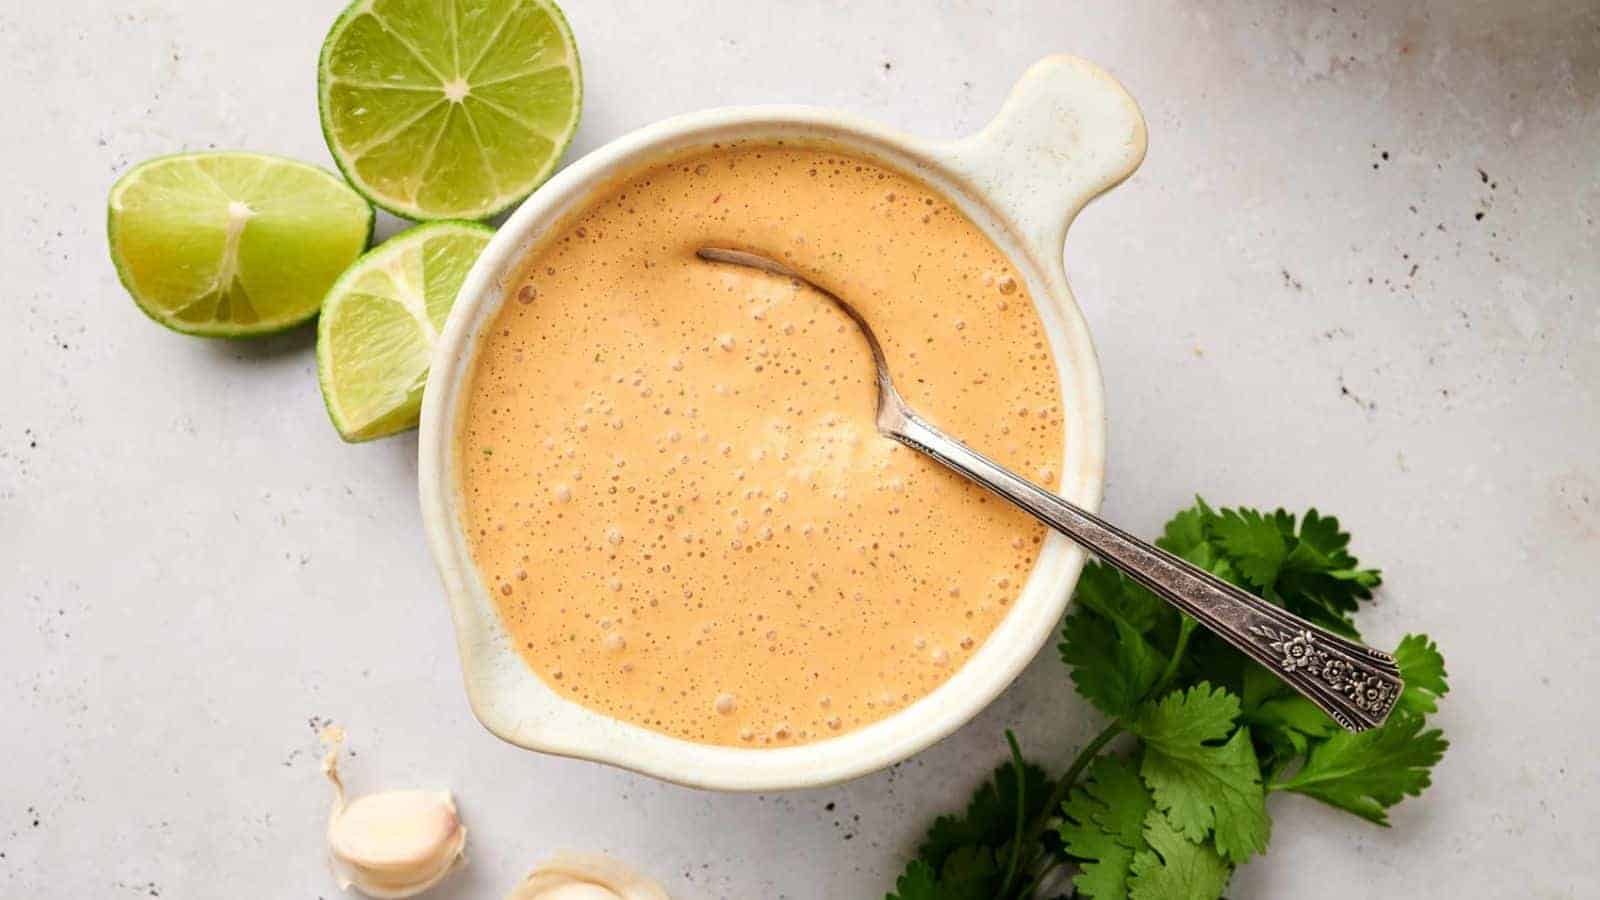 Creamy chipotle sauce with lime and herbs on a bright background.